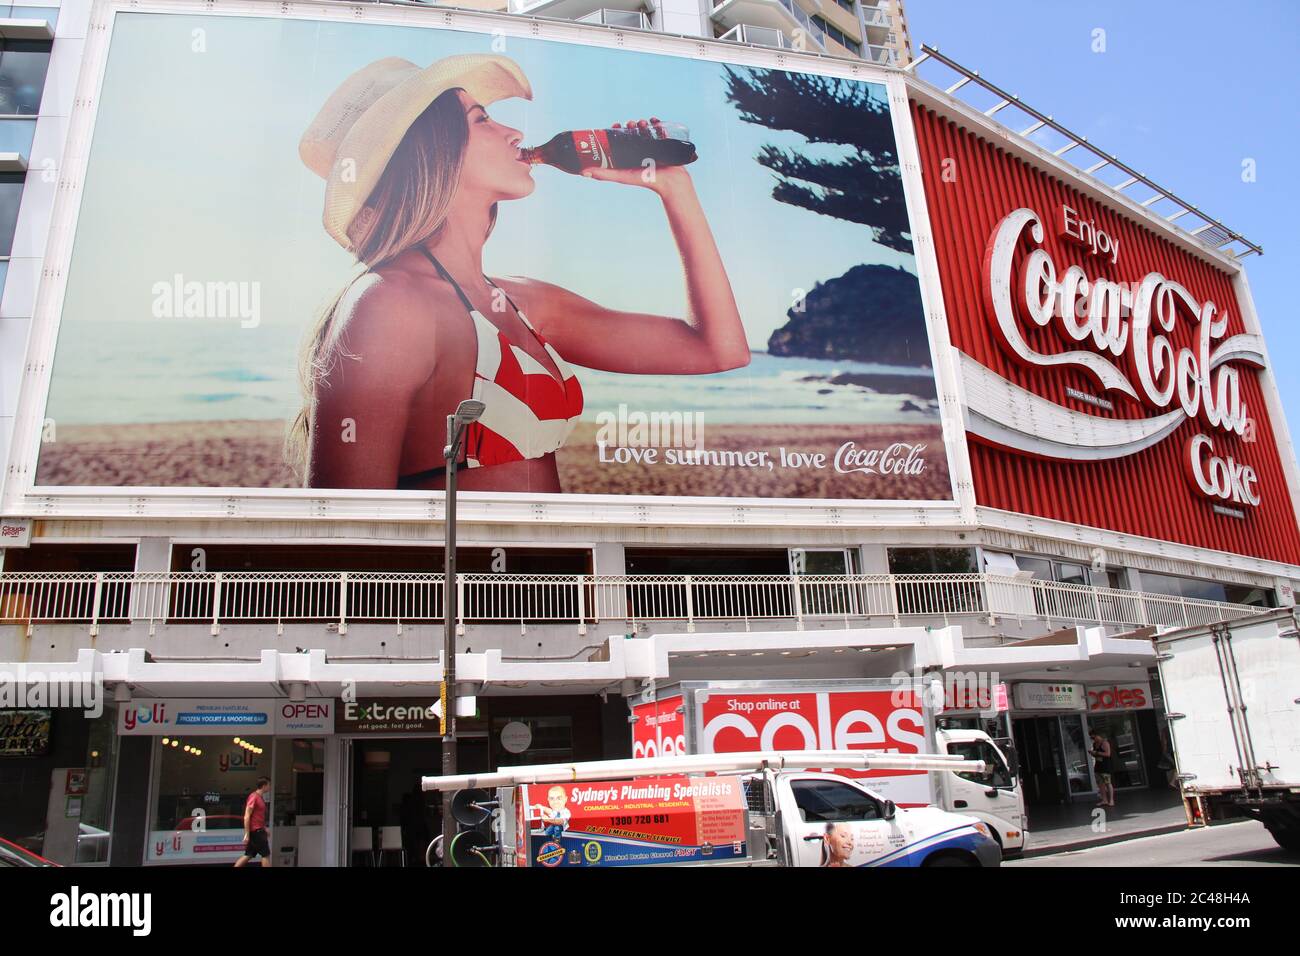 The famous Coca Cola sign landmark at the junction of Darlinghurst Road and Kings Cross Road in Kings Cross, Sydney. Stock Photo